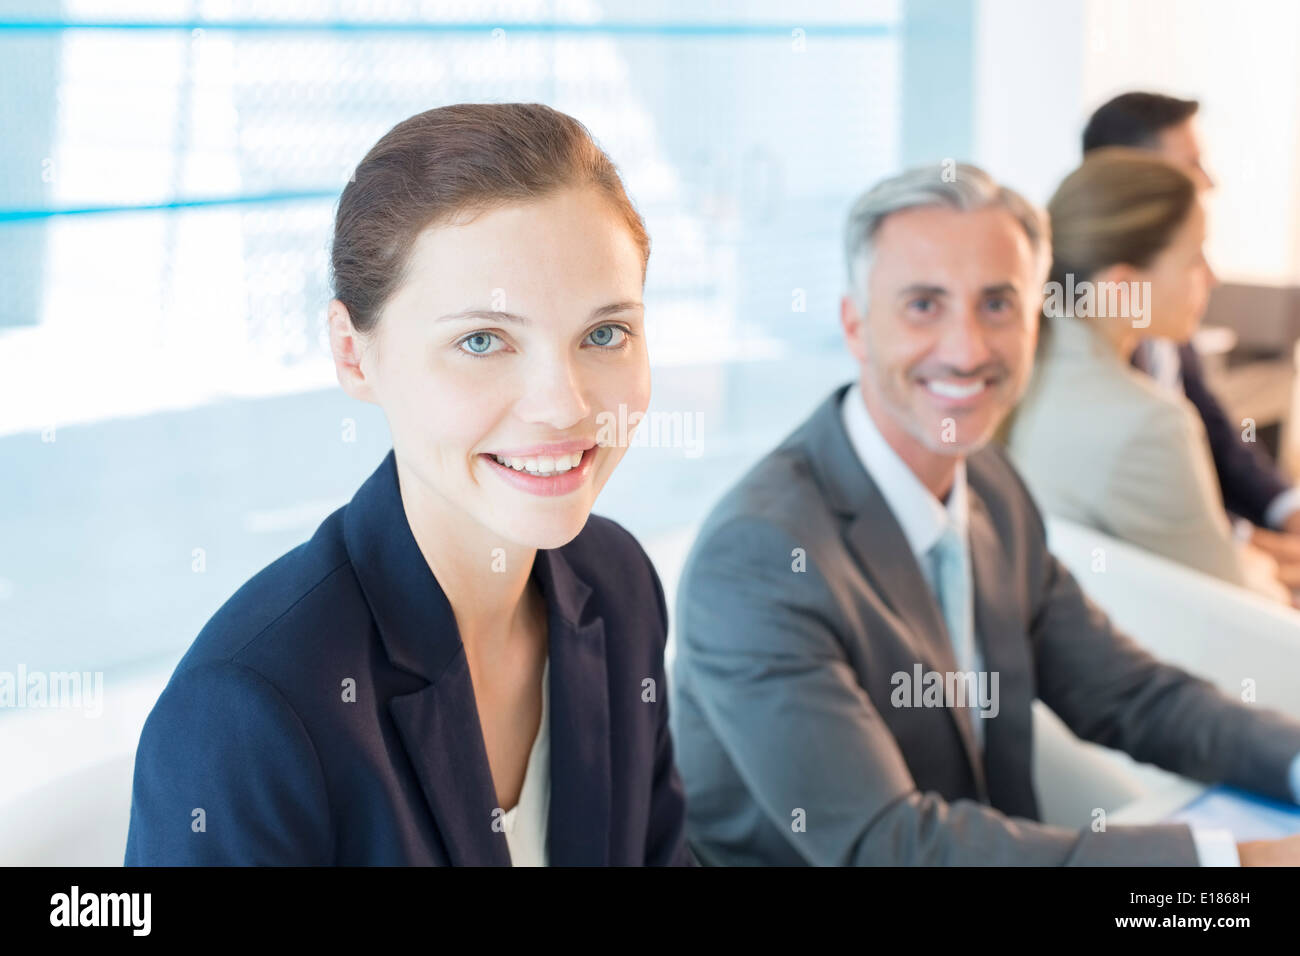 Portrait of business people in conference room Banque D'Images